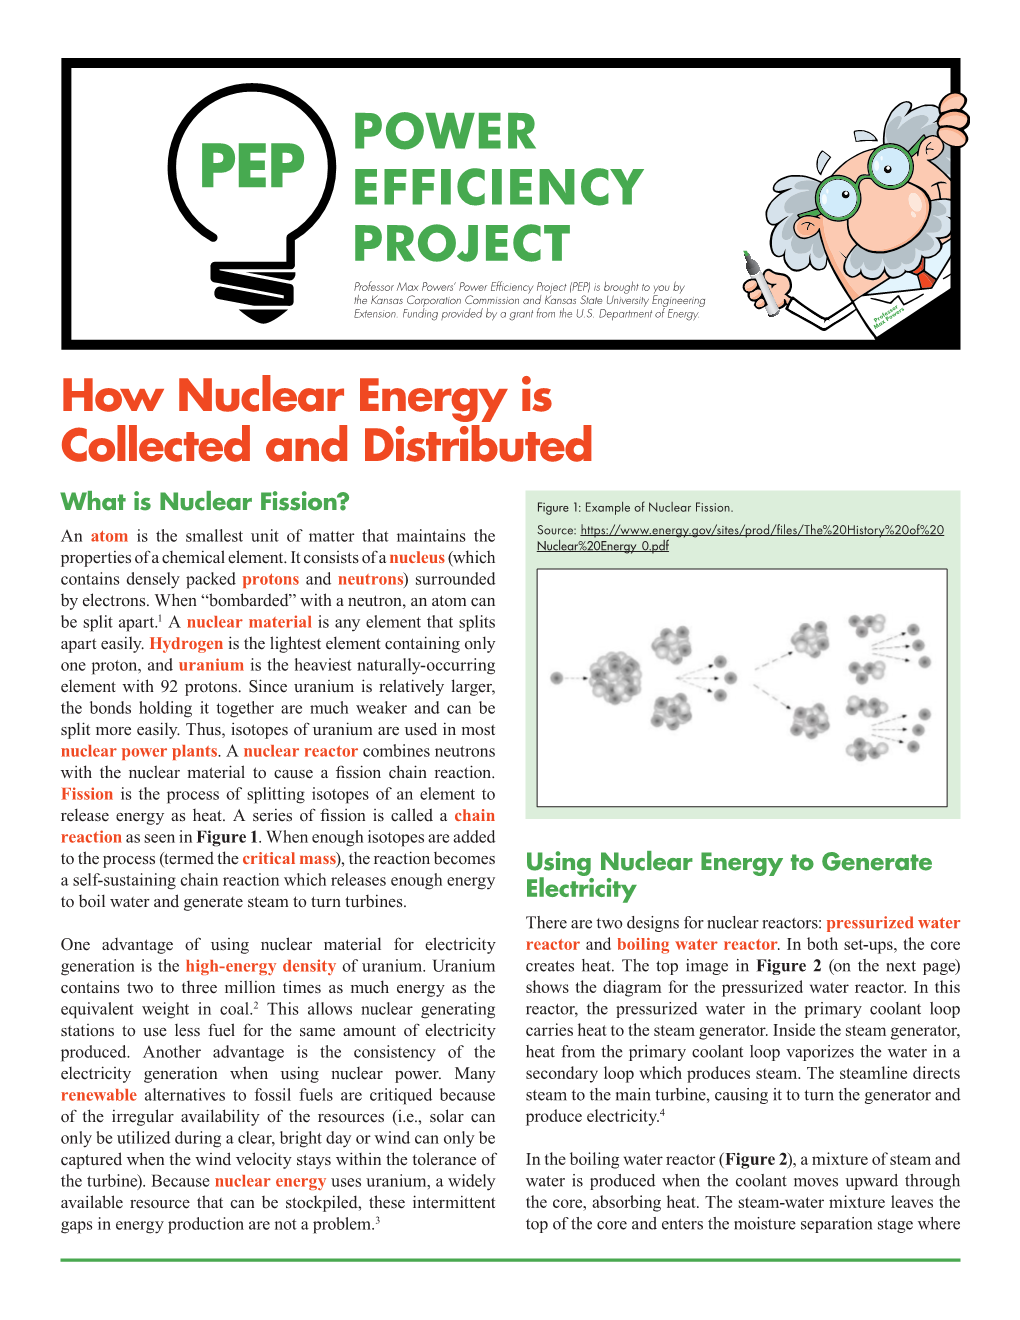 How Nuclear Energy Is Collected and Distributed